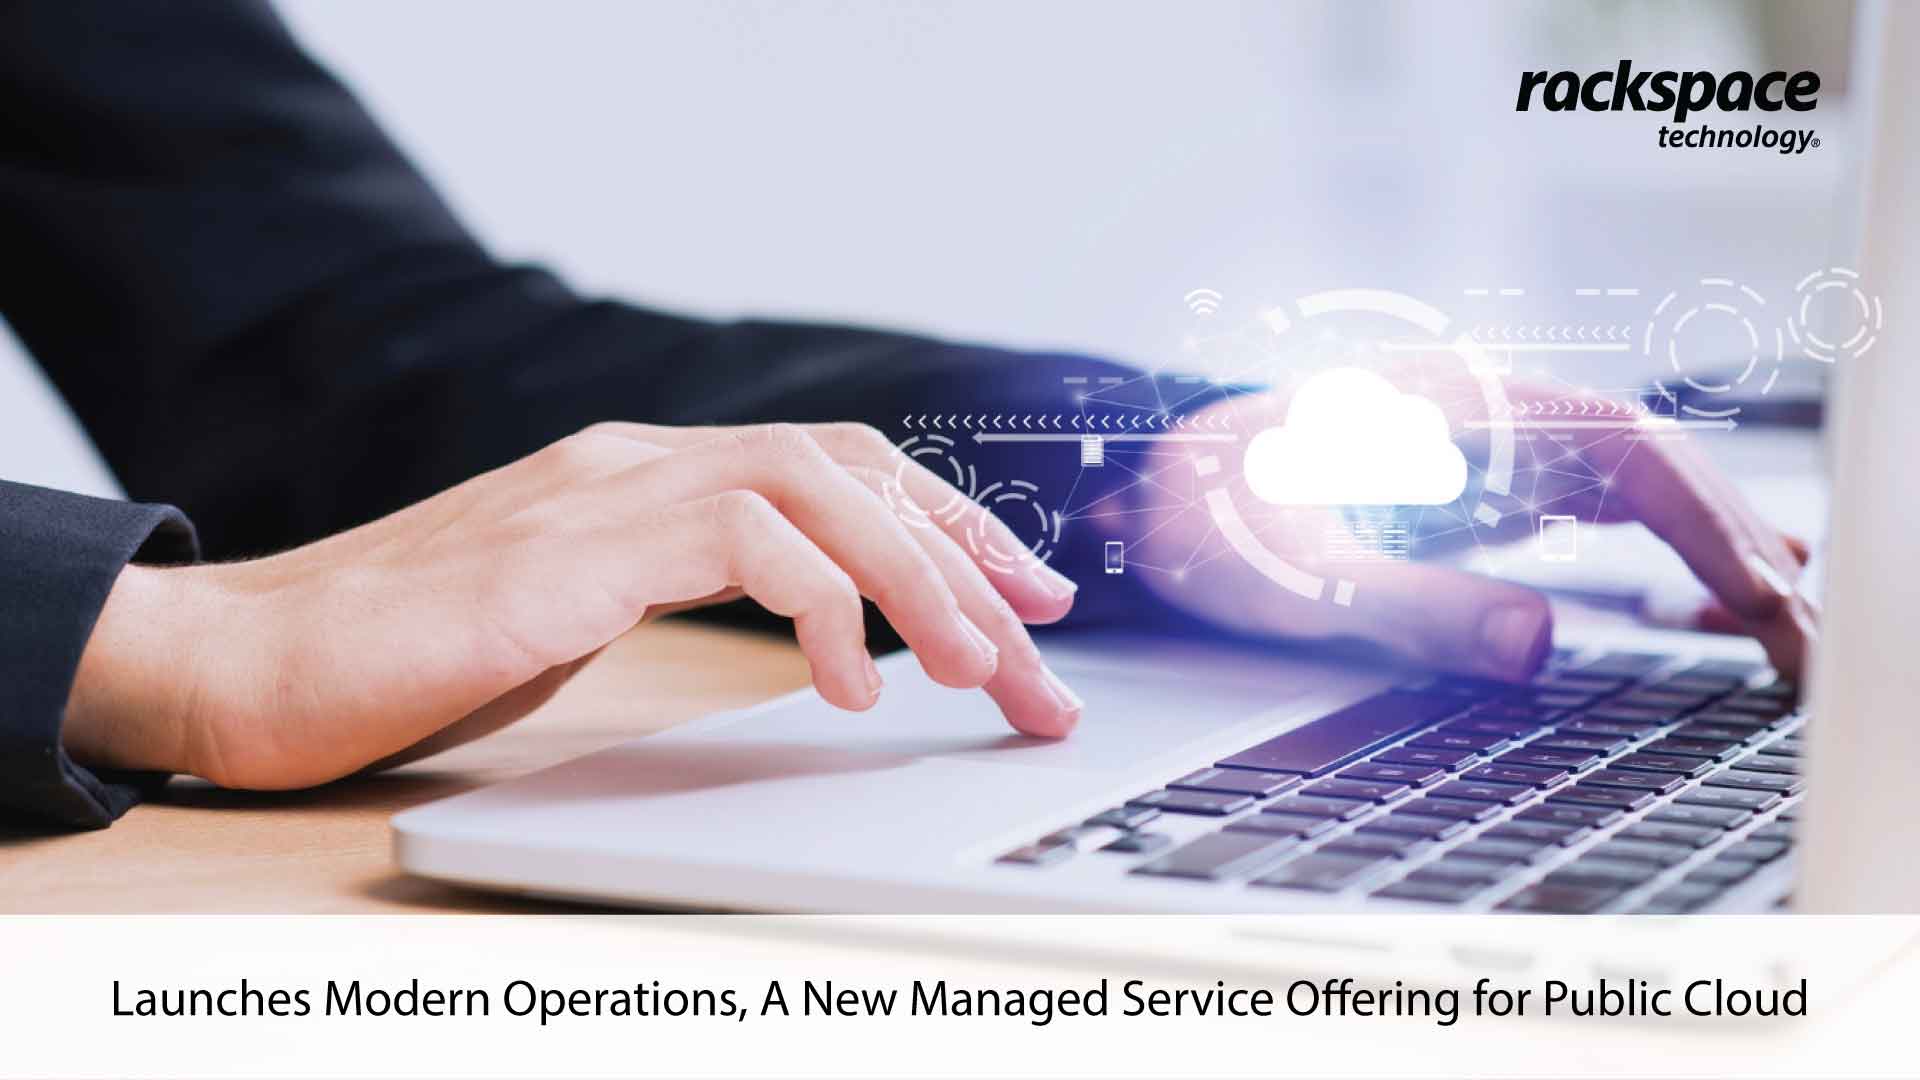 Rackspace Technology Launches Modern Operations, A New Managed Service Offering for Public Cloud